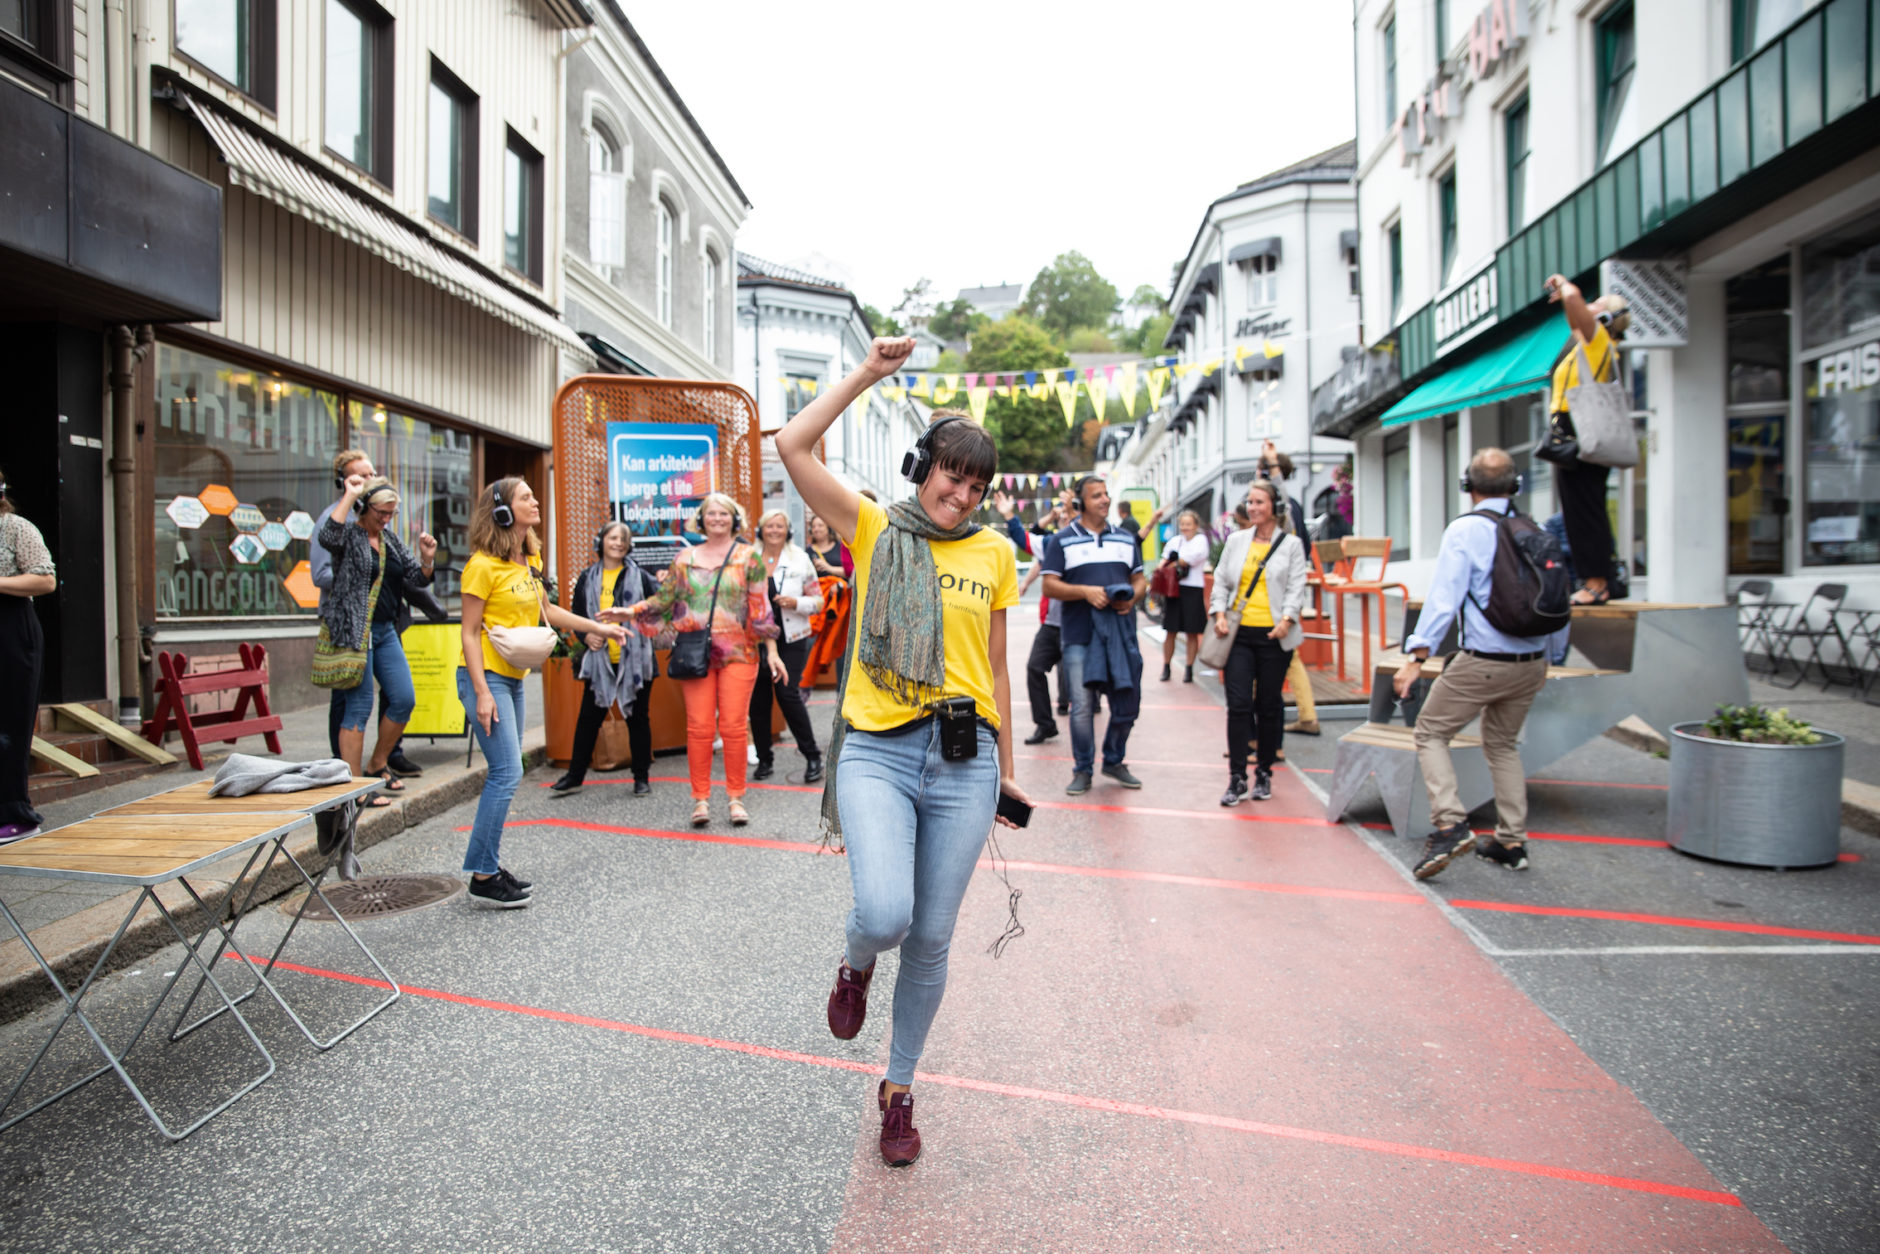 Experiencing a performative audio walk at Arendalsuka, Norway, based on your choice of urban future, part of OAT's events testing ideas and formats, 2018, ahead of the 2019 Triennale. © Arendalsuka/Mona Hauglid.